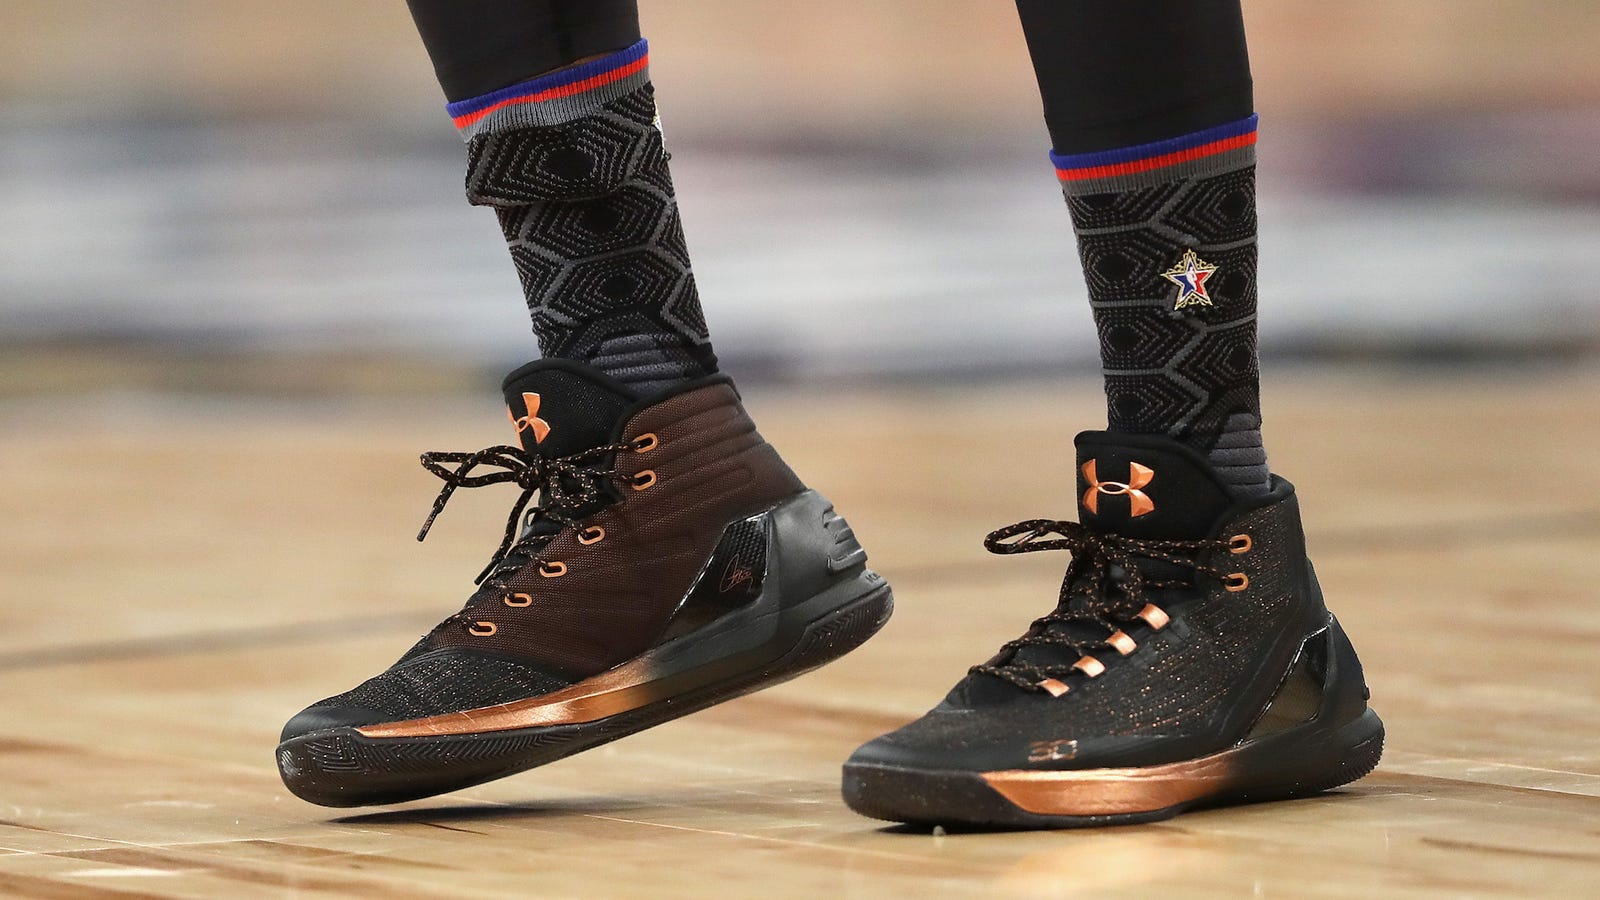 Nobody's Buying Under Armour's Steph Curry Signature Shoes